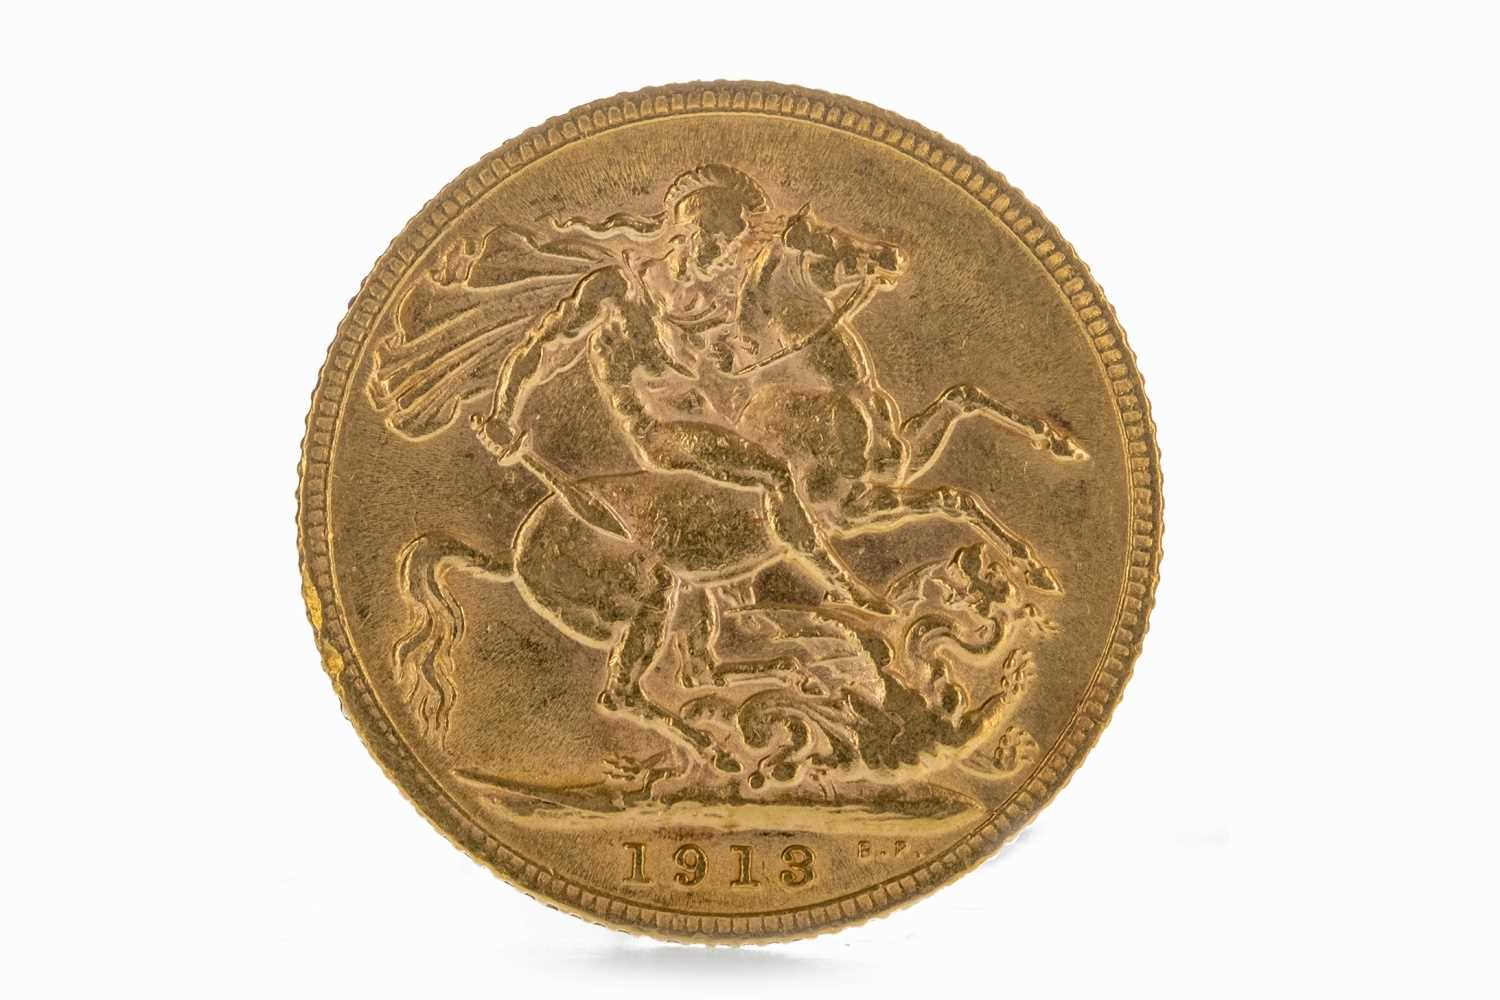 Lot 69 - A GEORGE V (1910 - 1936) GOLD SOVEREIGN DATED 1913